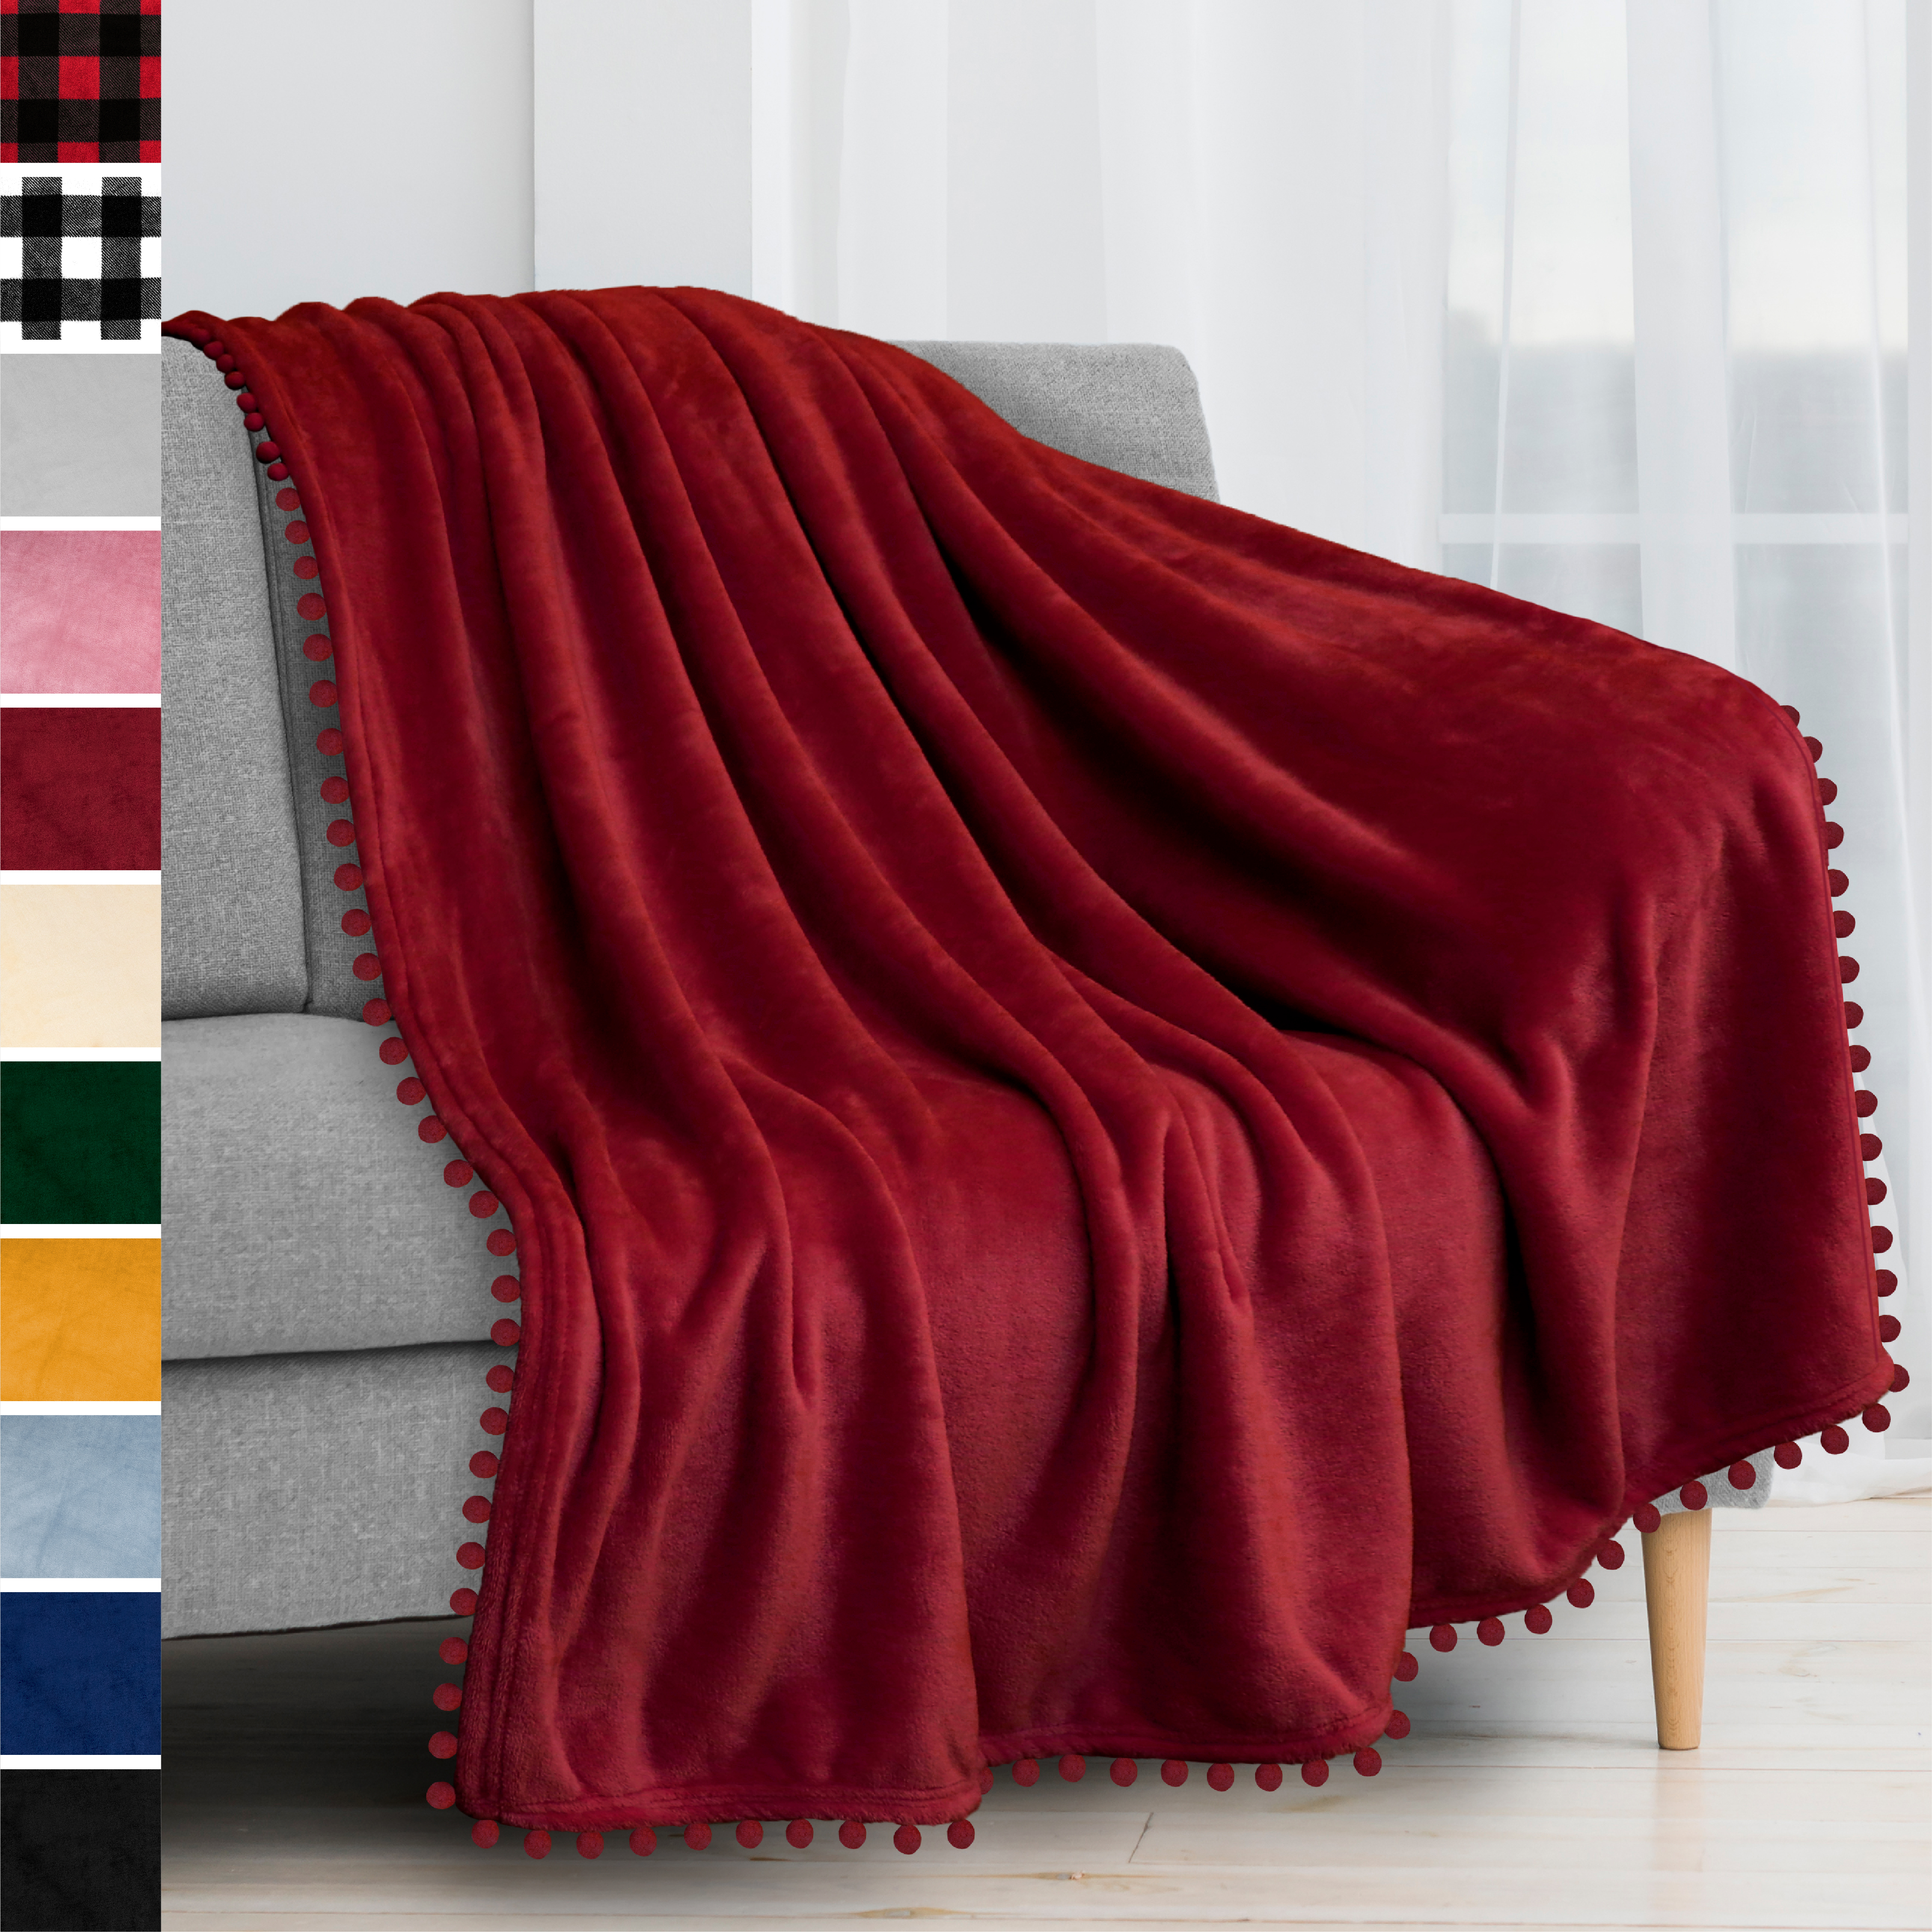 thumbnail 116 - Fleece Throw Blanket with Pom Pom Fringe Super Soft Lightweight Bed Couch Home